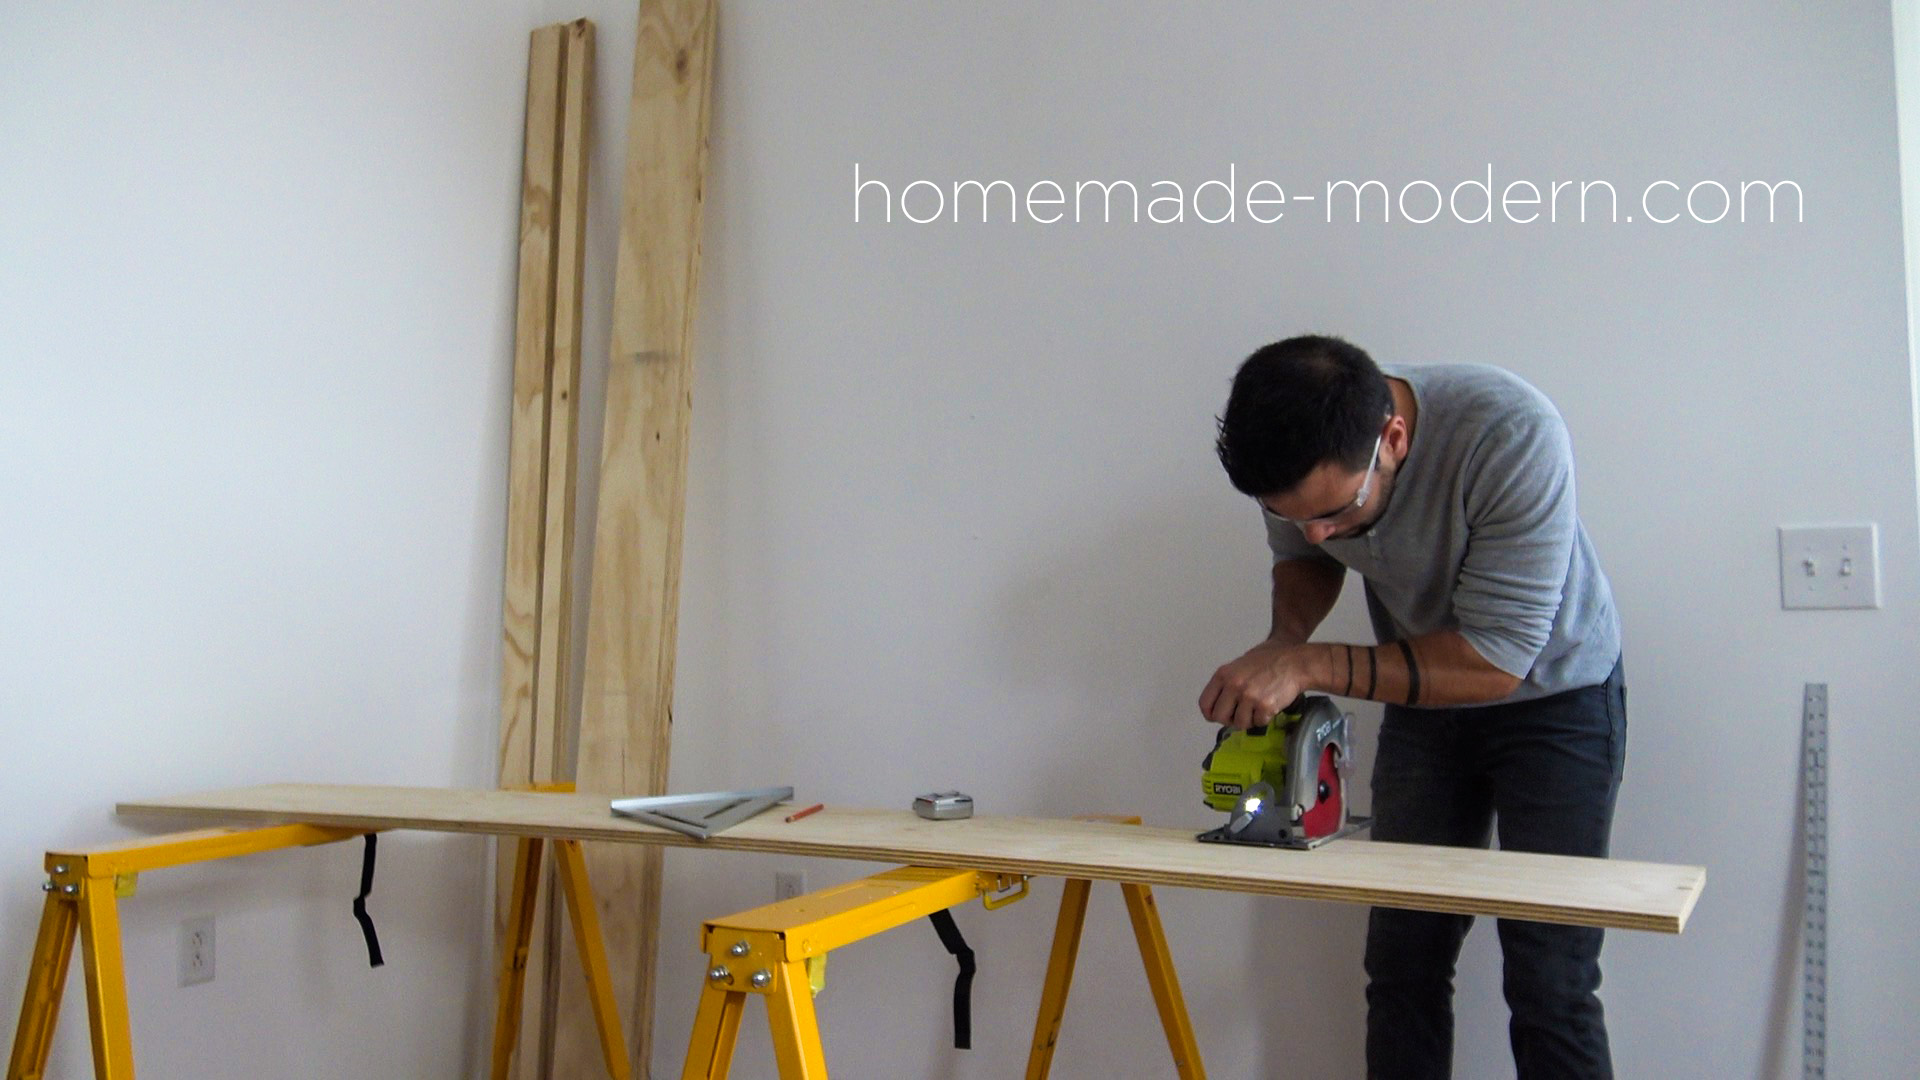 This DIY plywood home office is made out of ¾” plywood from Home depot and was designed and built by Ben Uyeda. For more information go to HomeMade-Modern.com